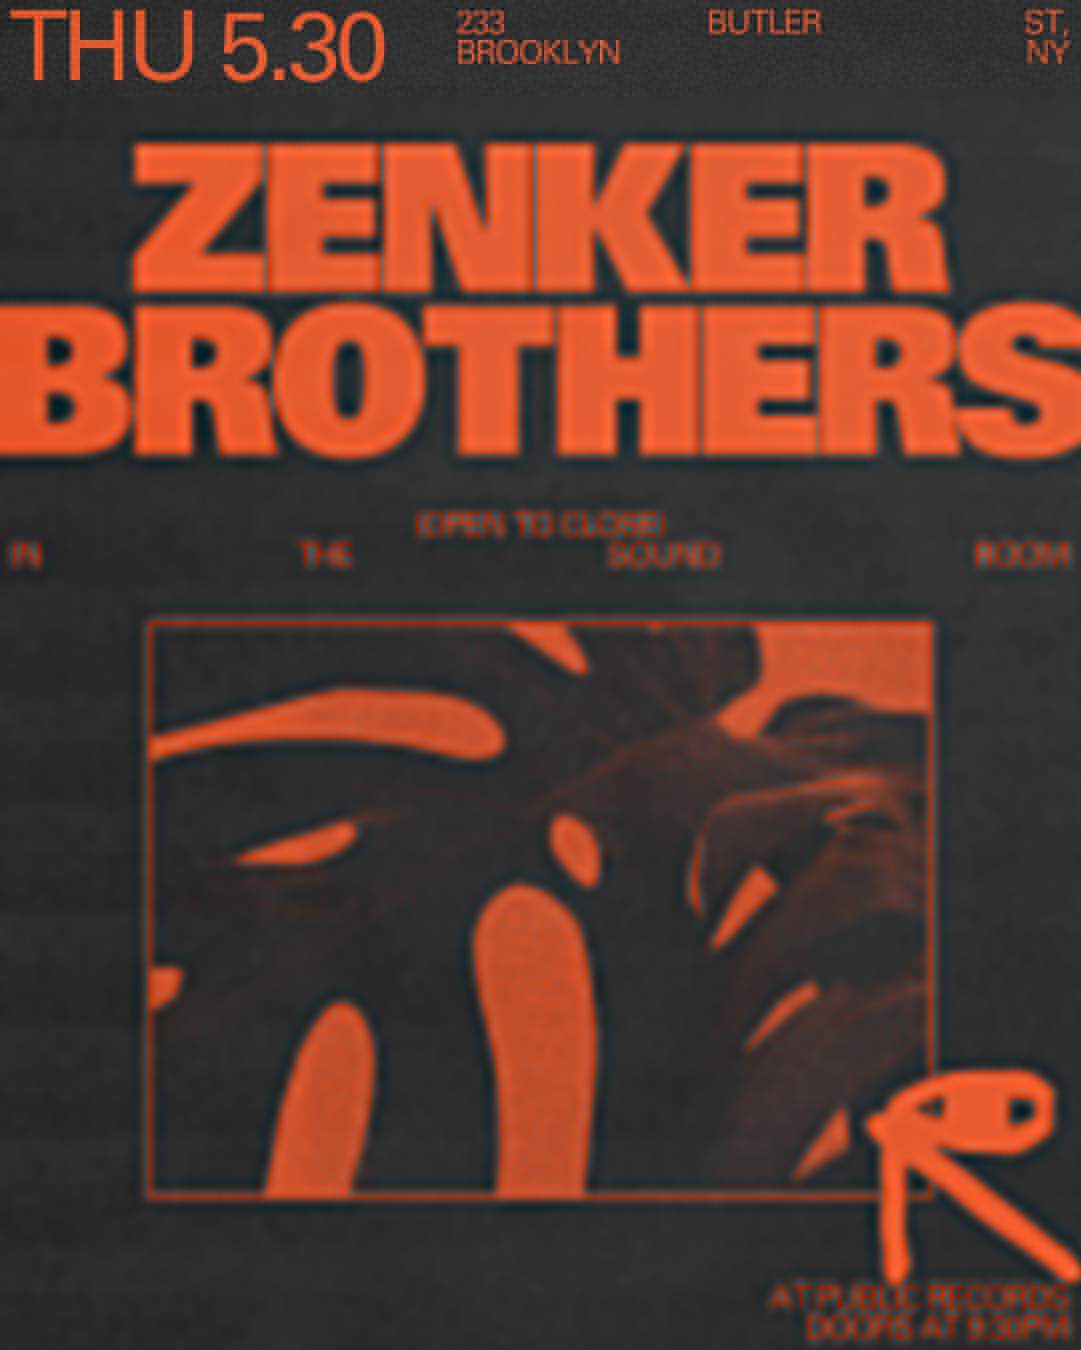 Zenker Brothers (open to close) - フライヤー表